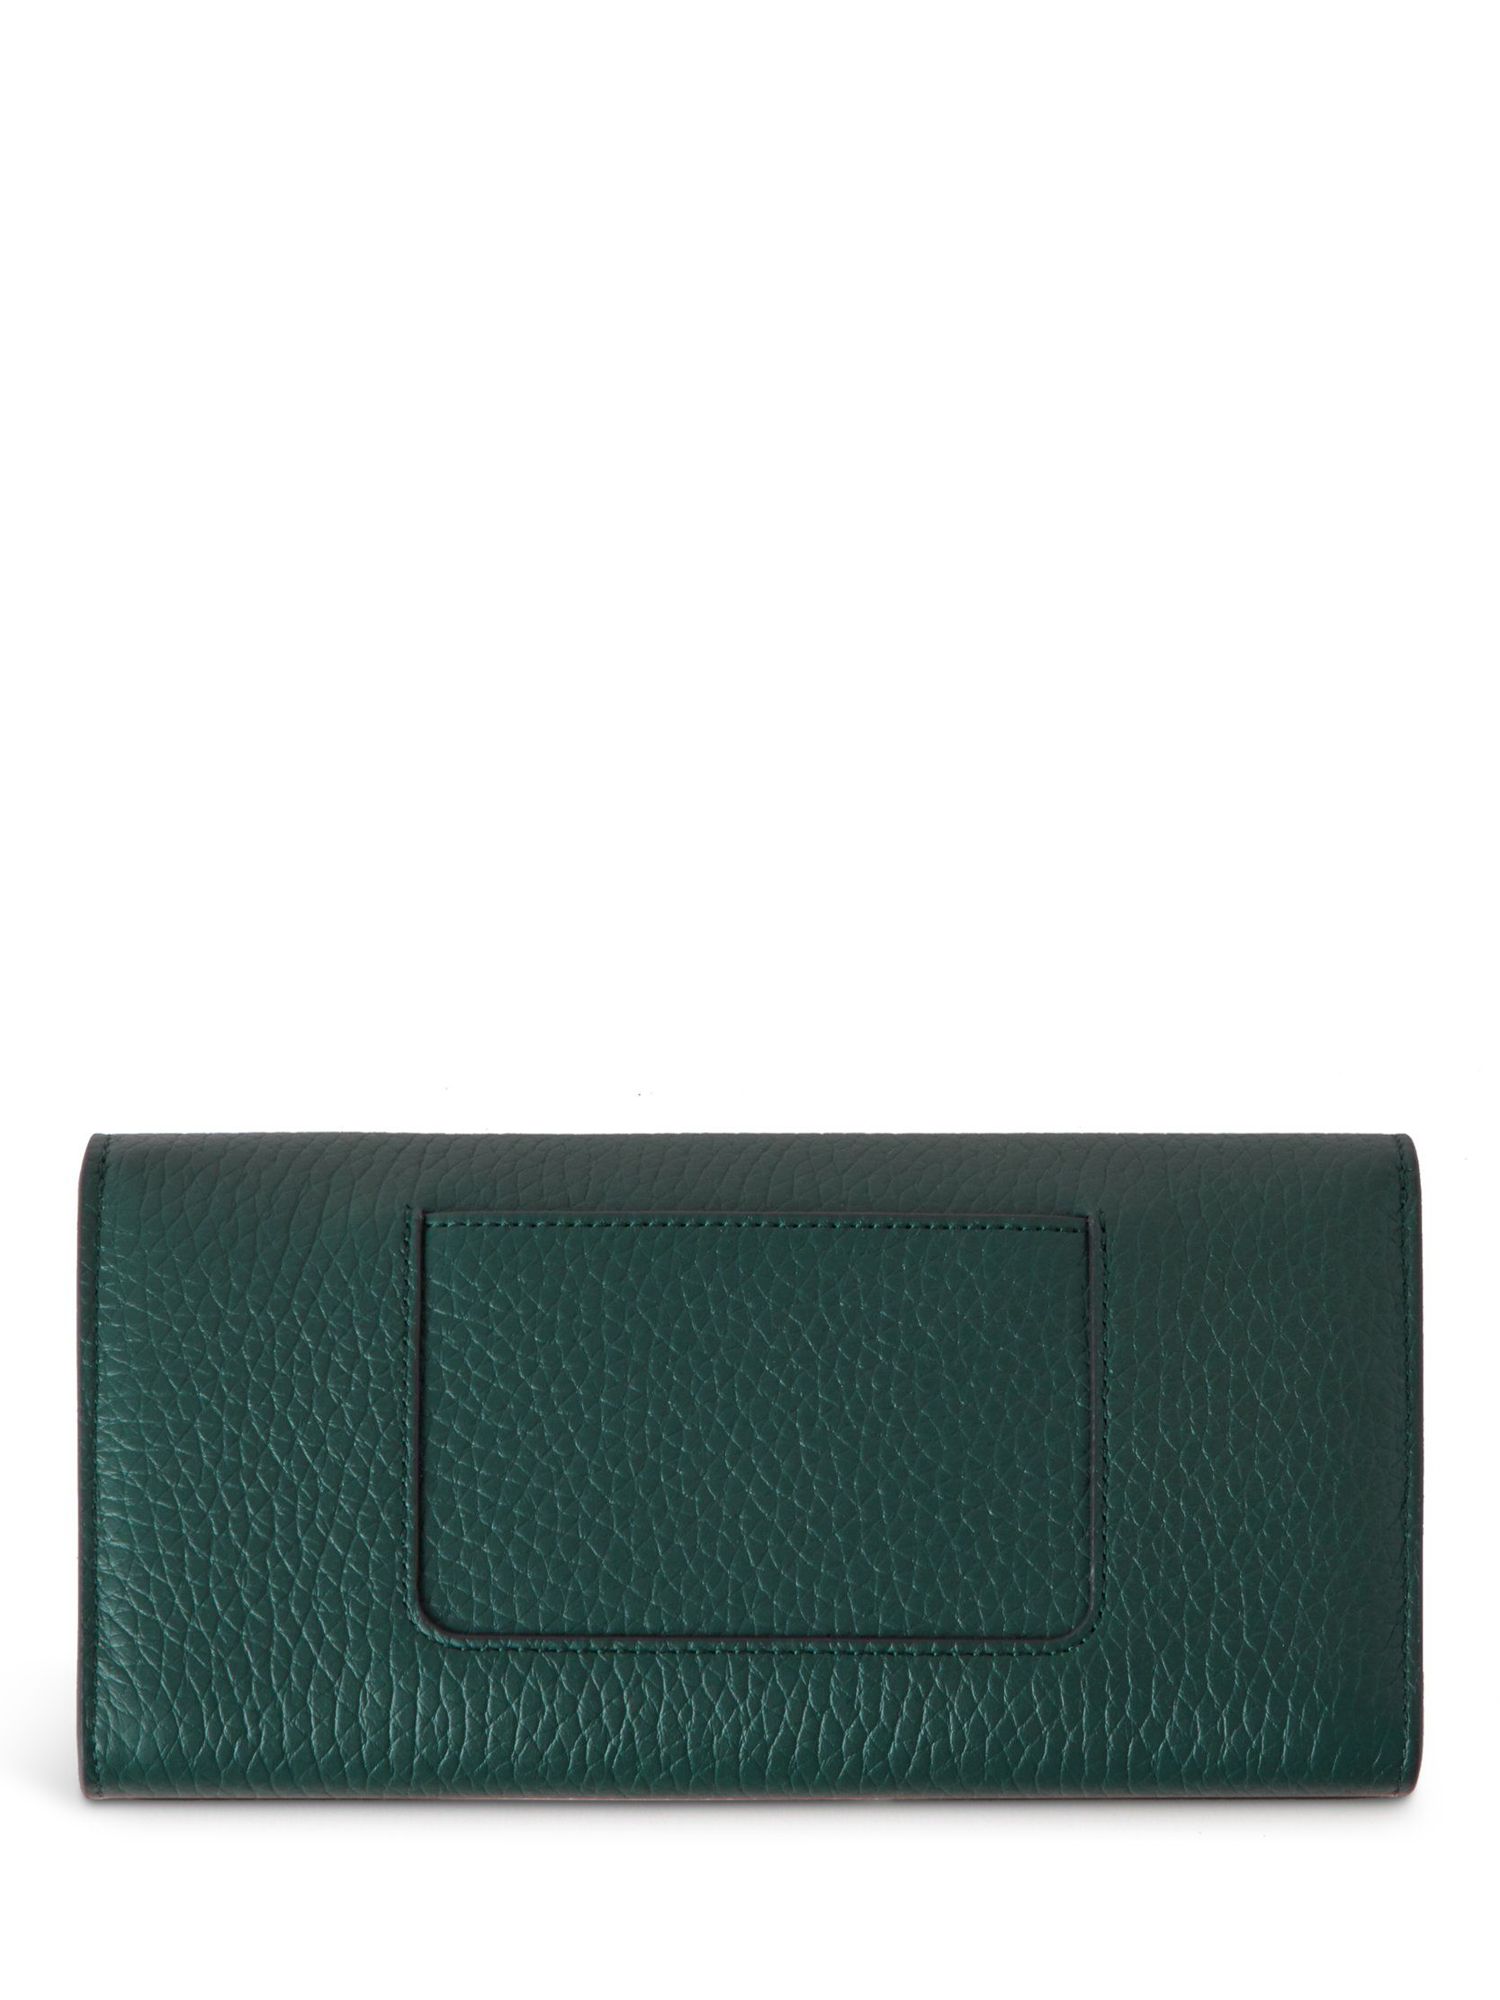 Mulberry Darley Heavy Grain Leather Wallet, Mulberry Green at John ...